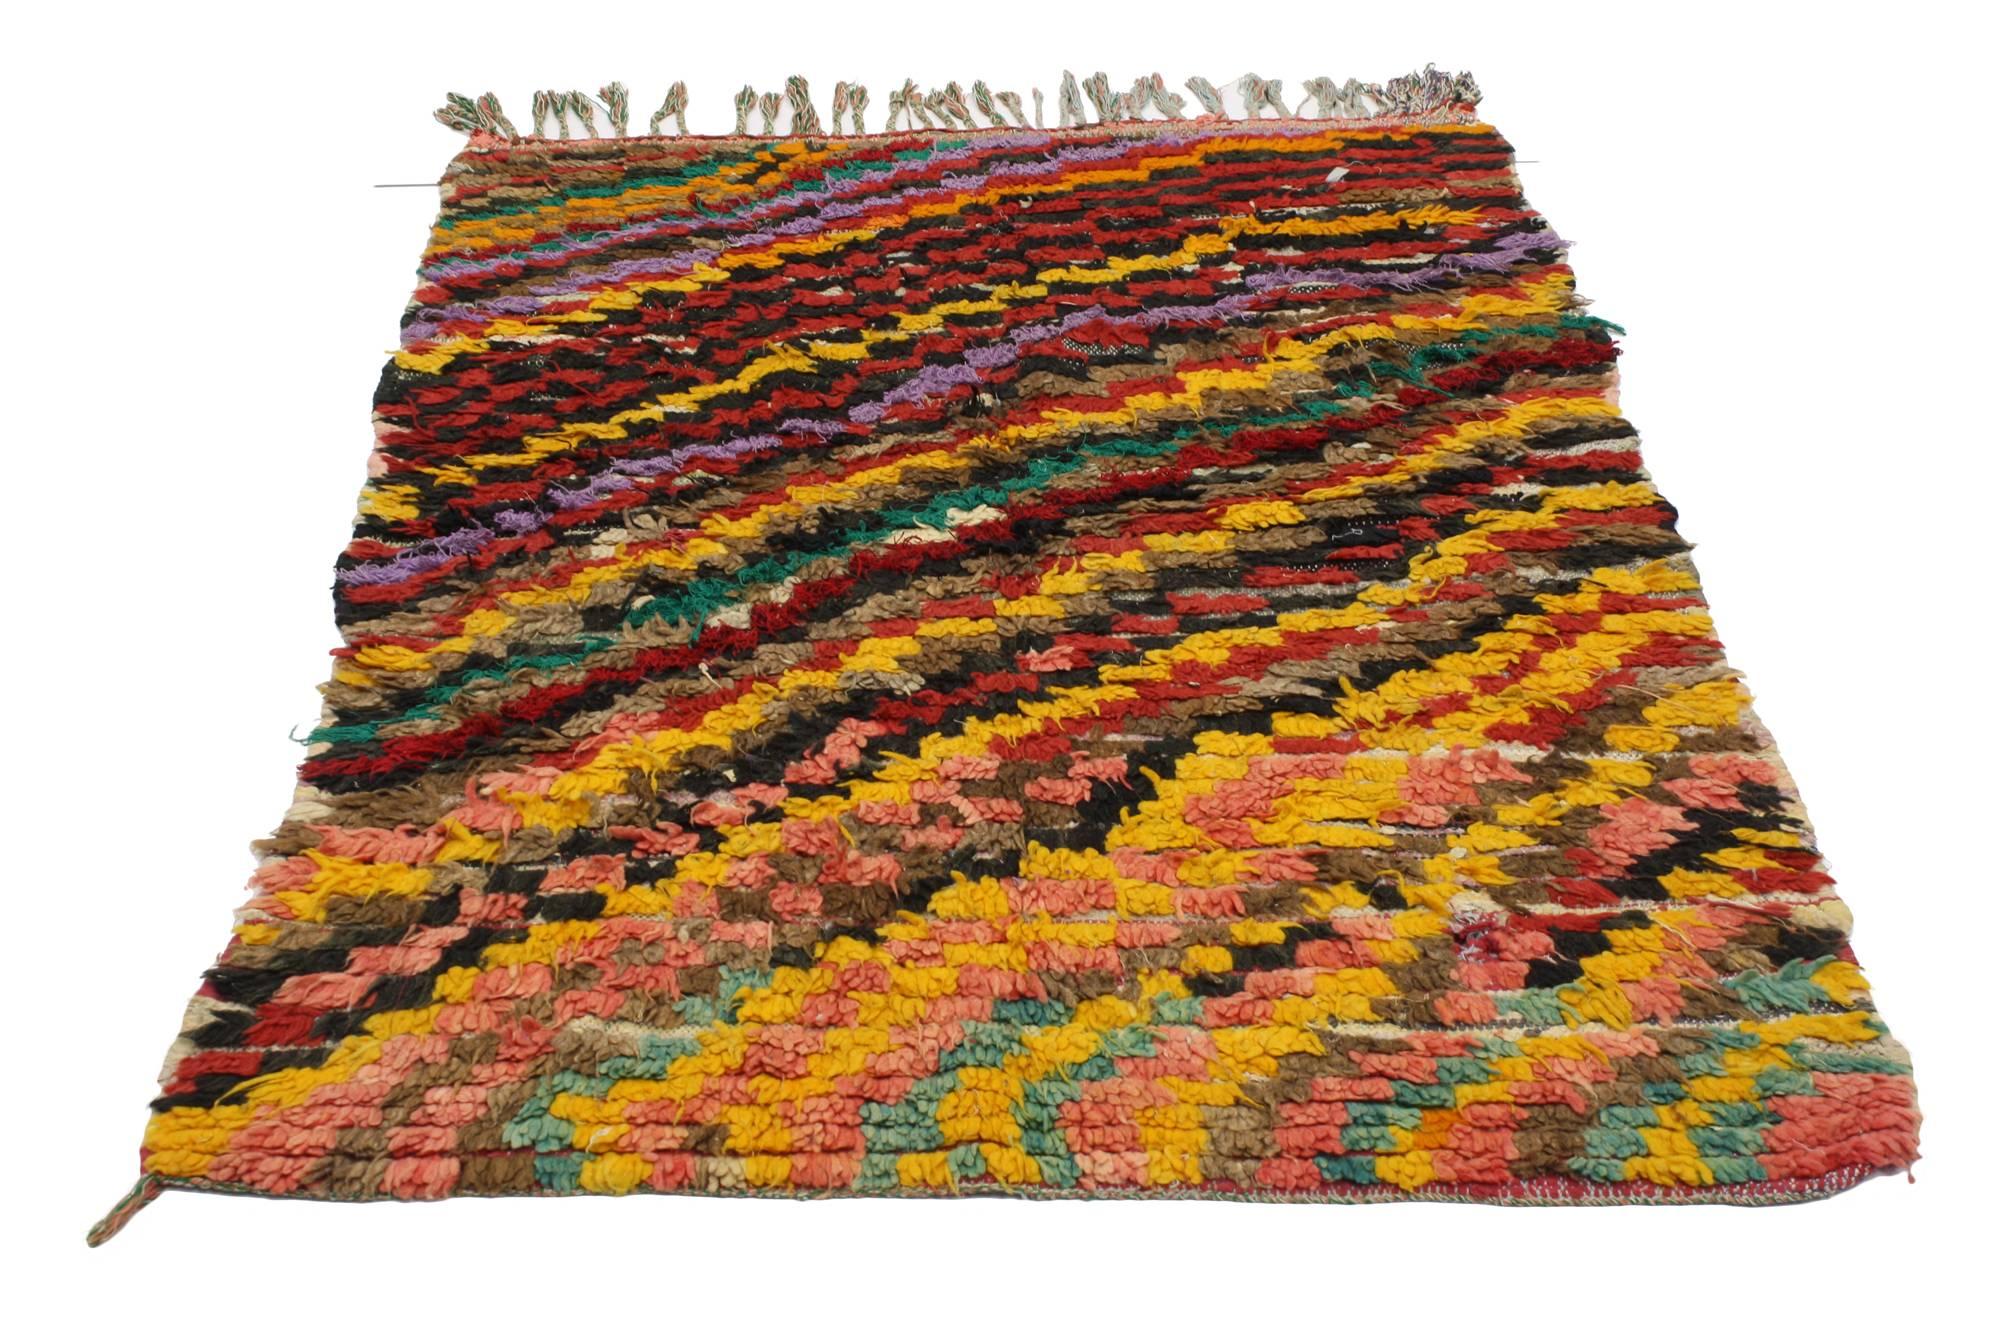 20507, vintage Berber Moroccan Boucherouite rug, Shag Accent rug. This colorful vintage Berber Moroccan Boucherouite rug features an all-over rod pattern. The rods unite to form diagonal lines and create a truly unique look. In ancient Berber